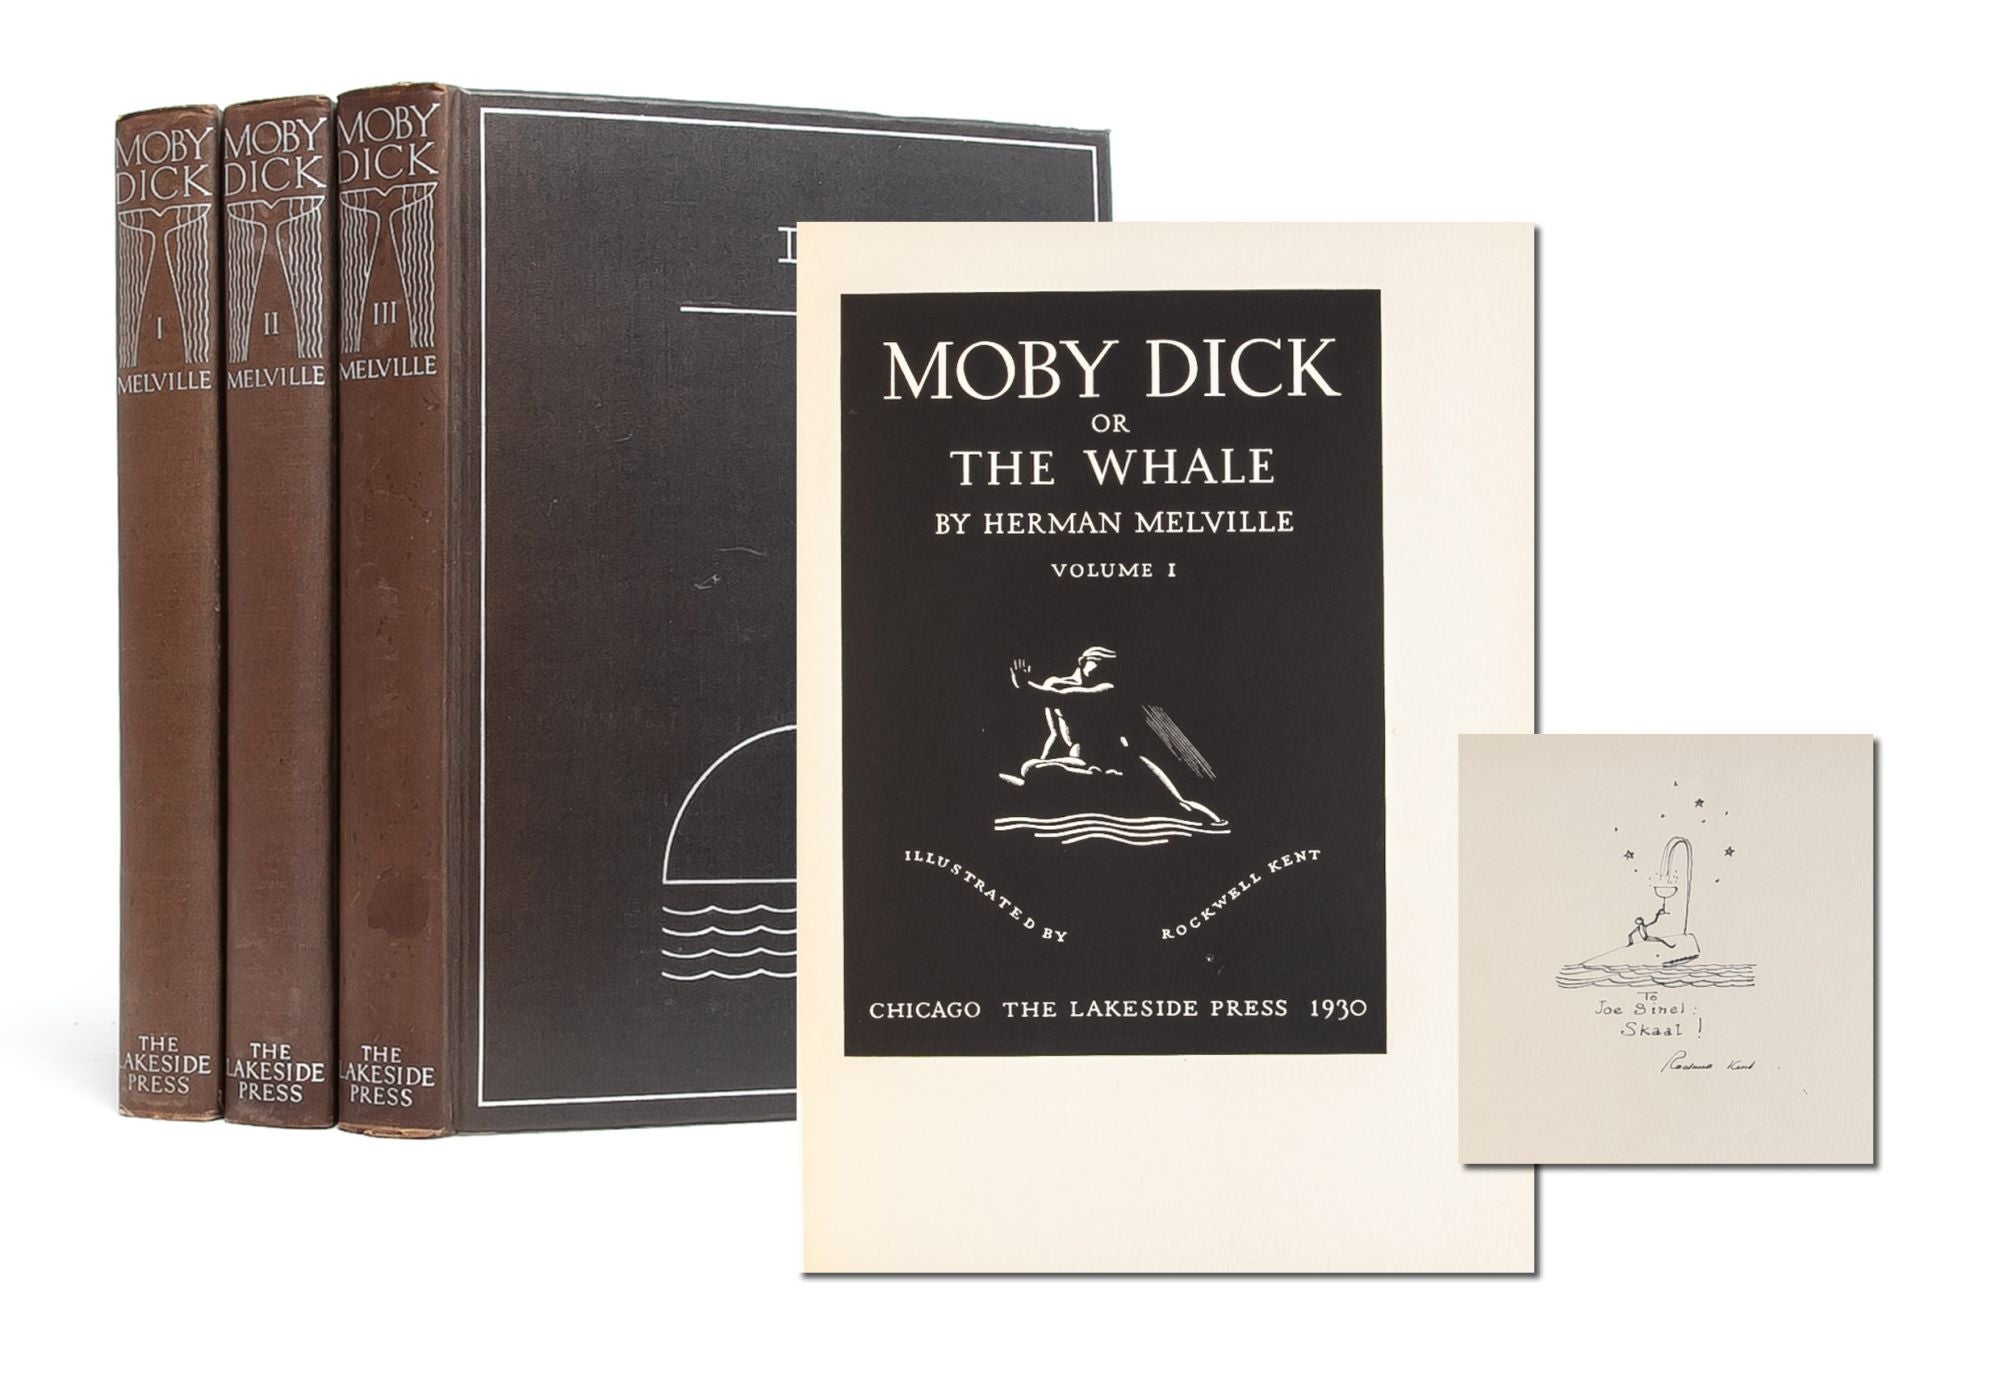 Moby Dick Inscribed with artwork by Kent, Rockwell Kent, Herman Melville